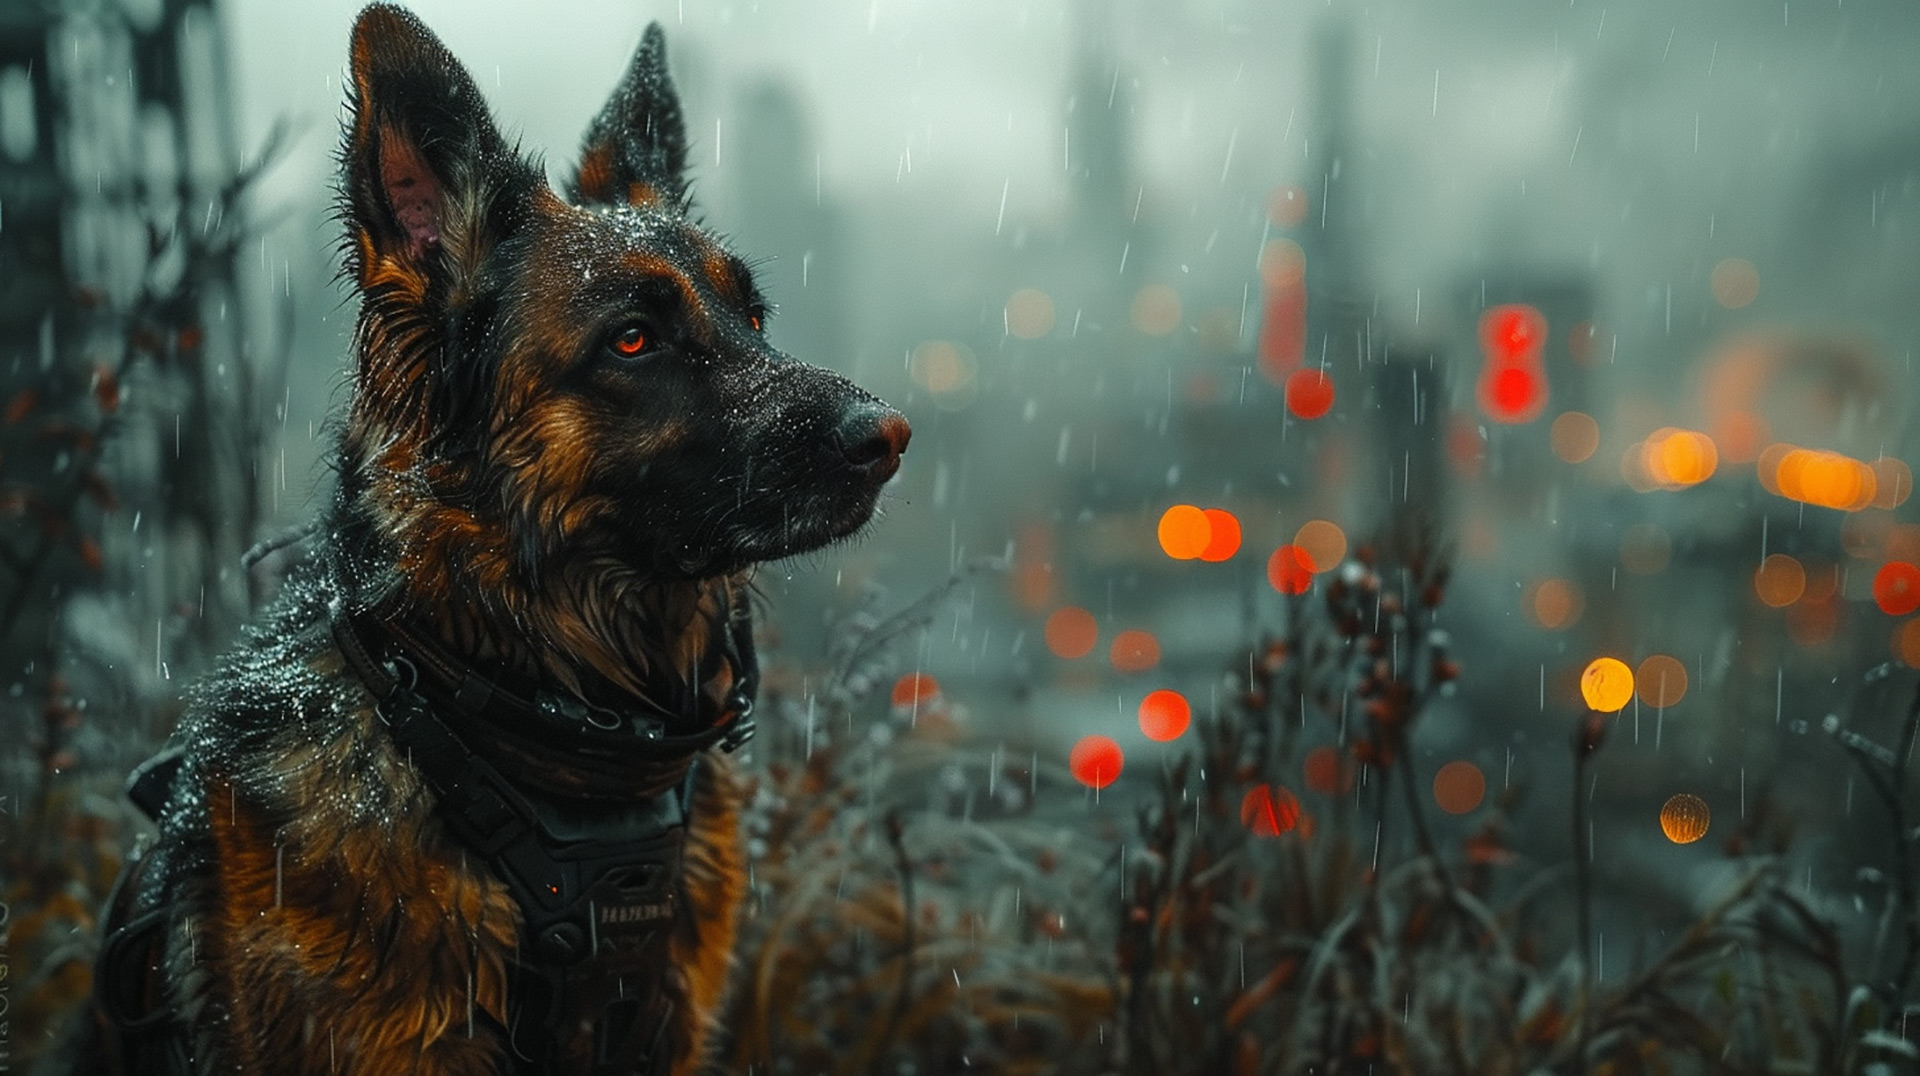 Desktop Backgrounds: AI-Generated Dog Images in 4K